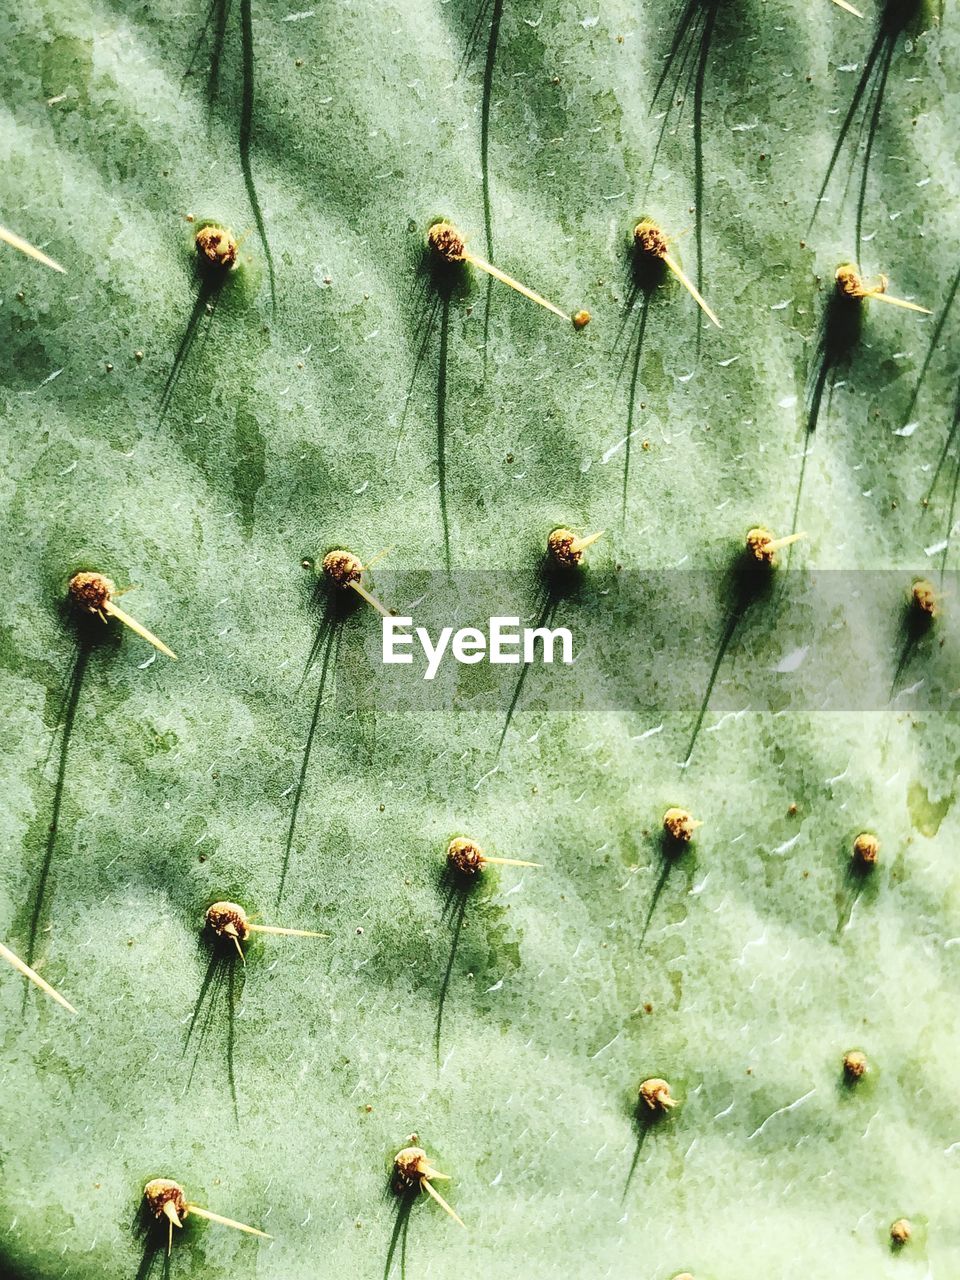 FULL FRAME SHOT OF PRICKLY PEAR CACTUS ON LEAVES